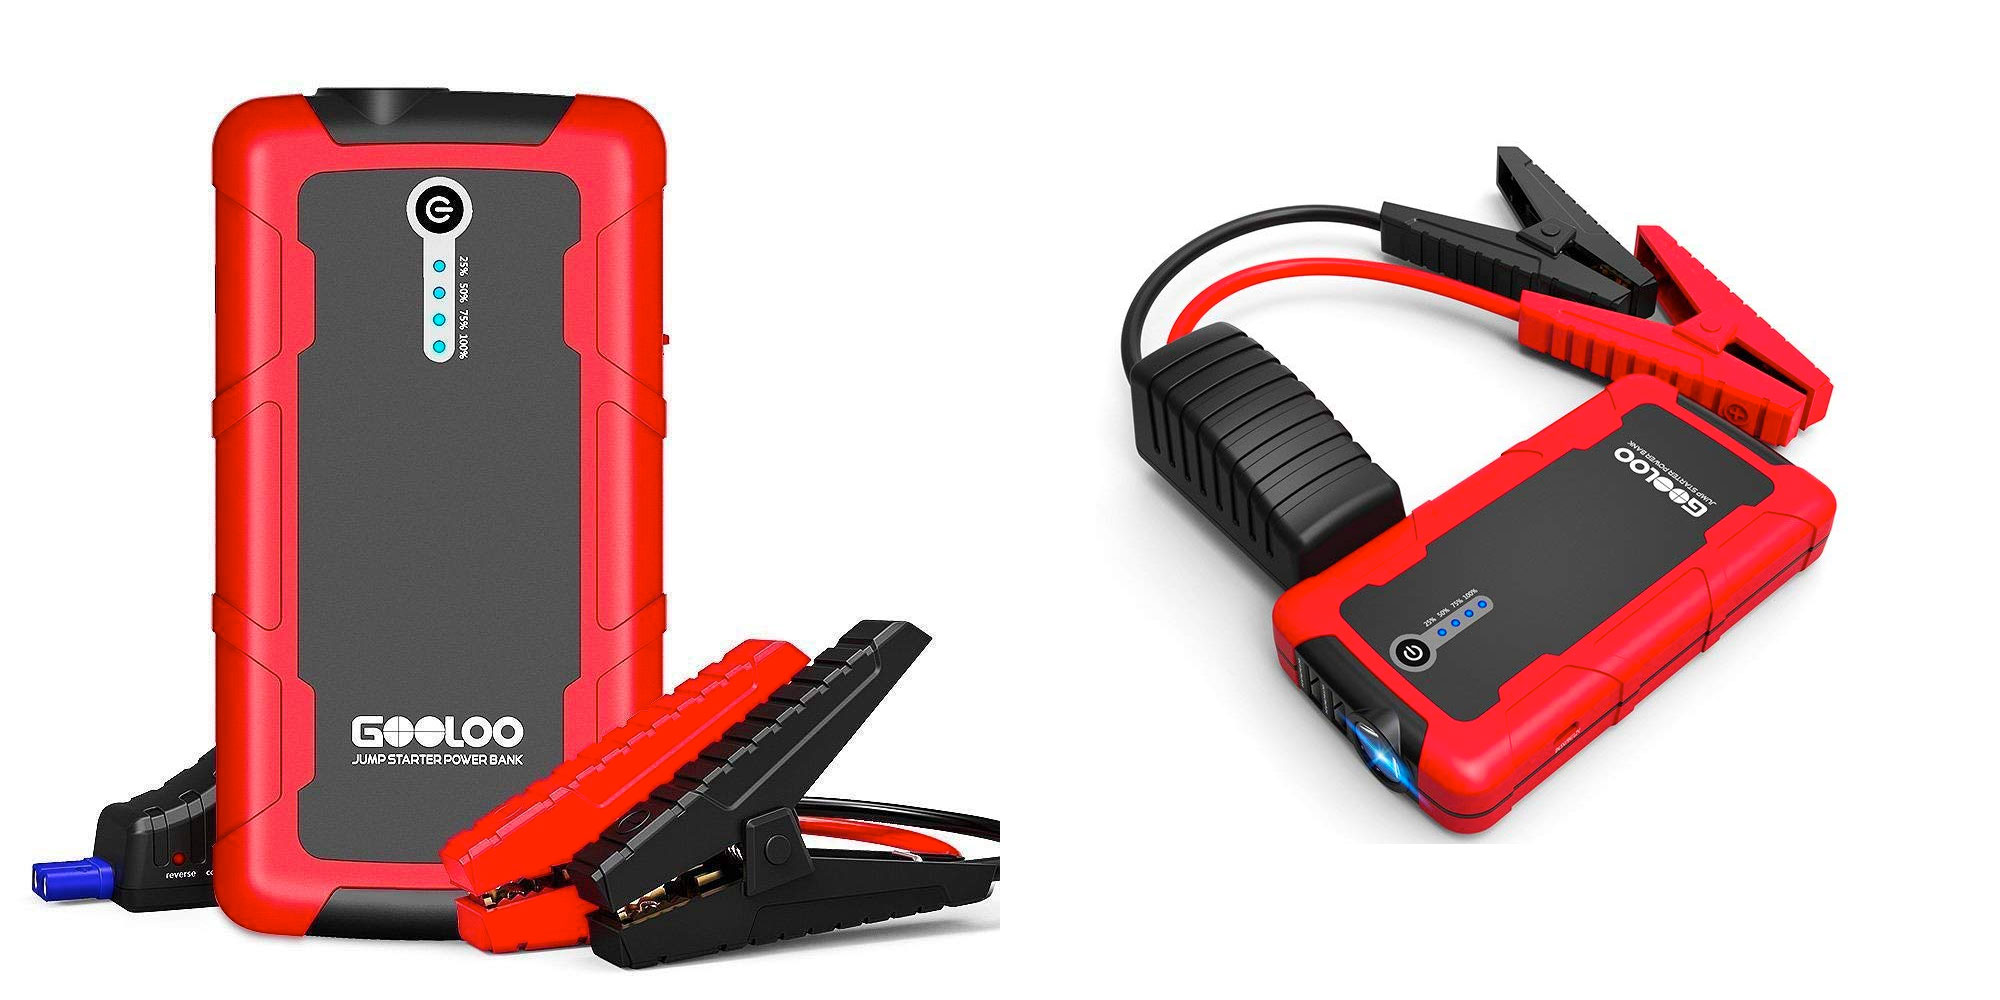 Start Your Car Up To 20 Times Power Your Phone W This Portable Jump Starter 26 Reg 60 9to5toys - area 79 armed containment facility roblox